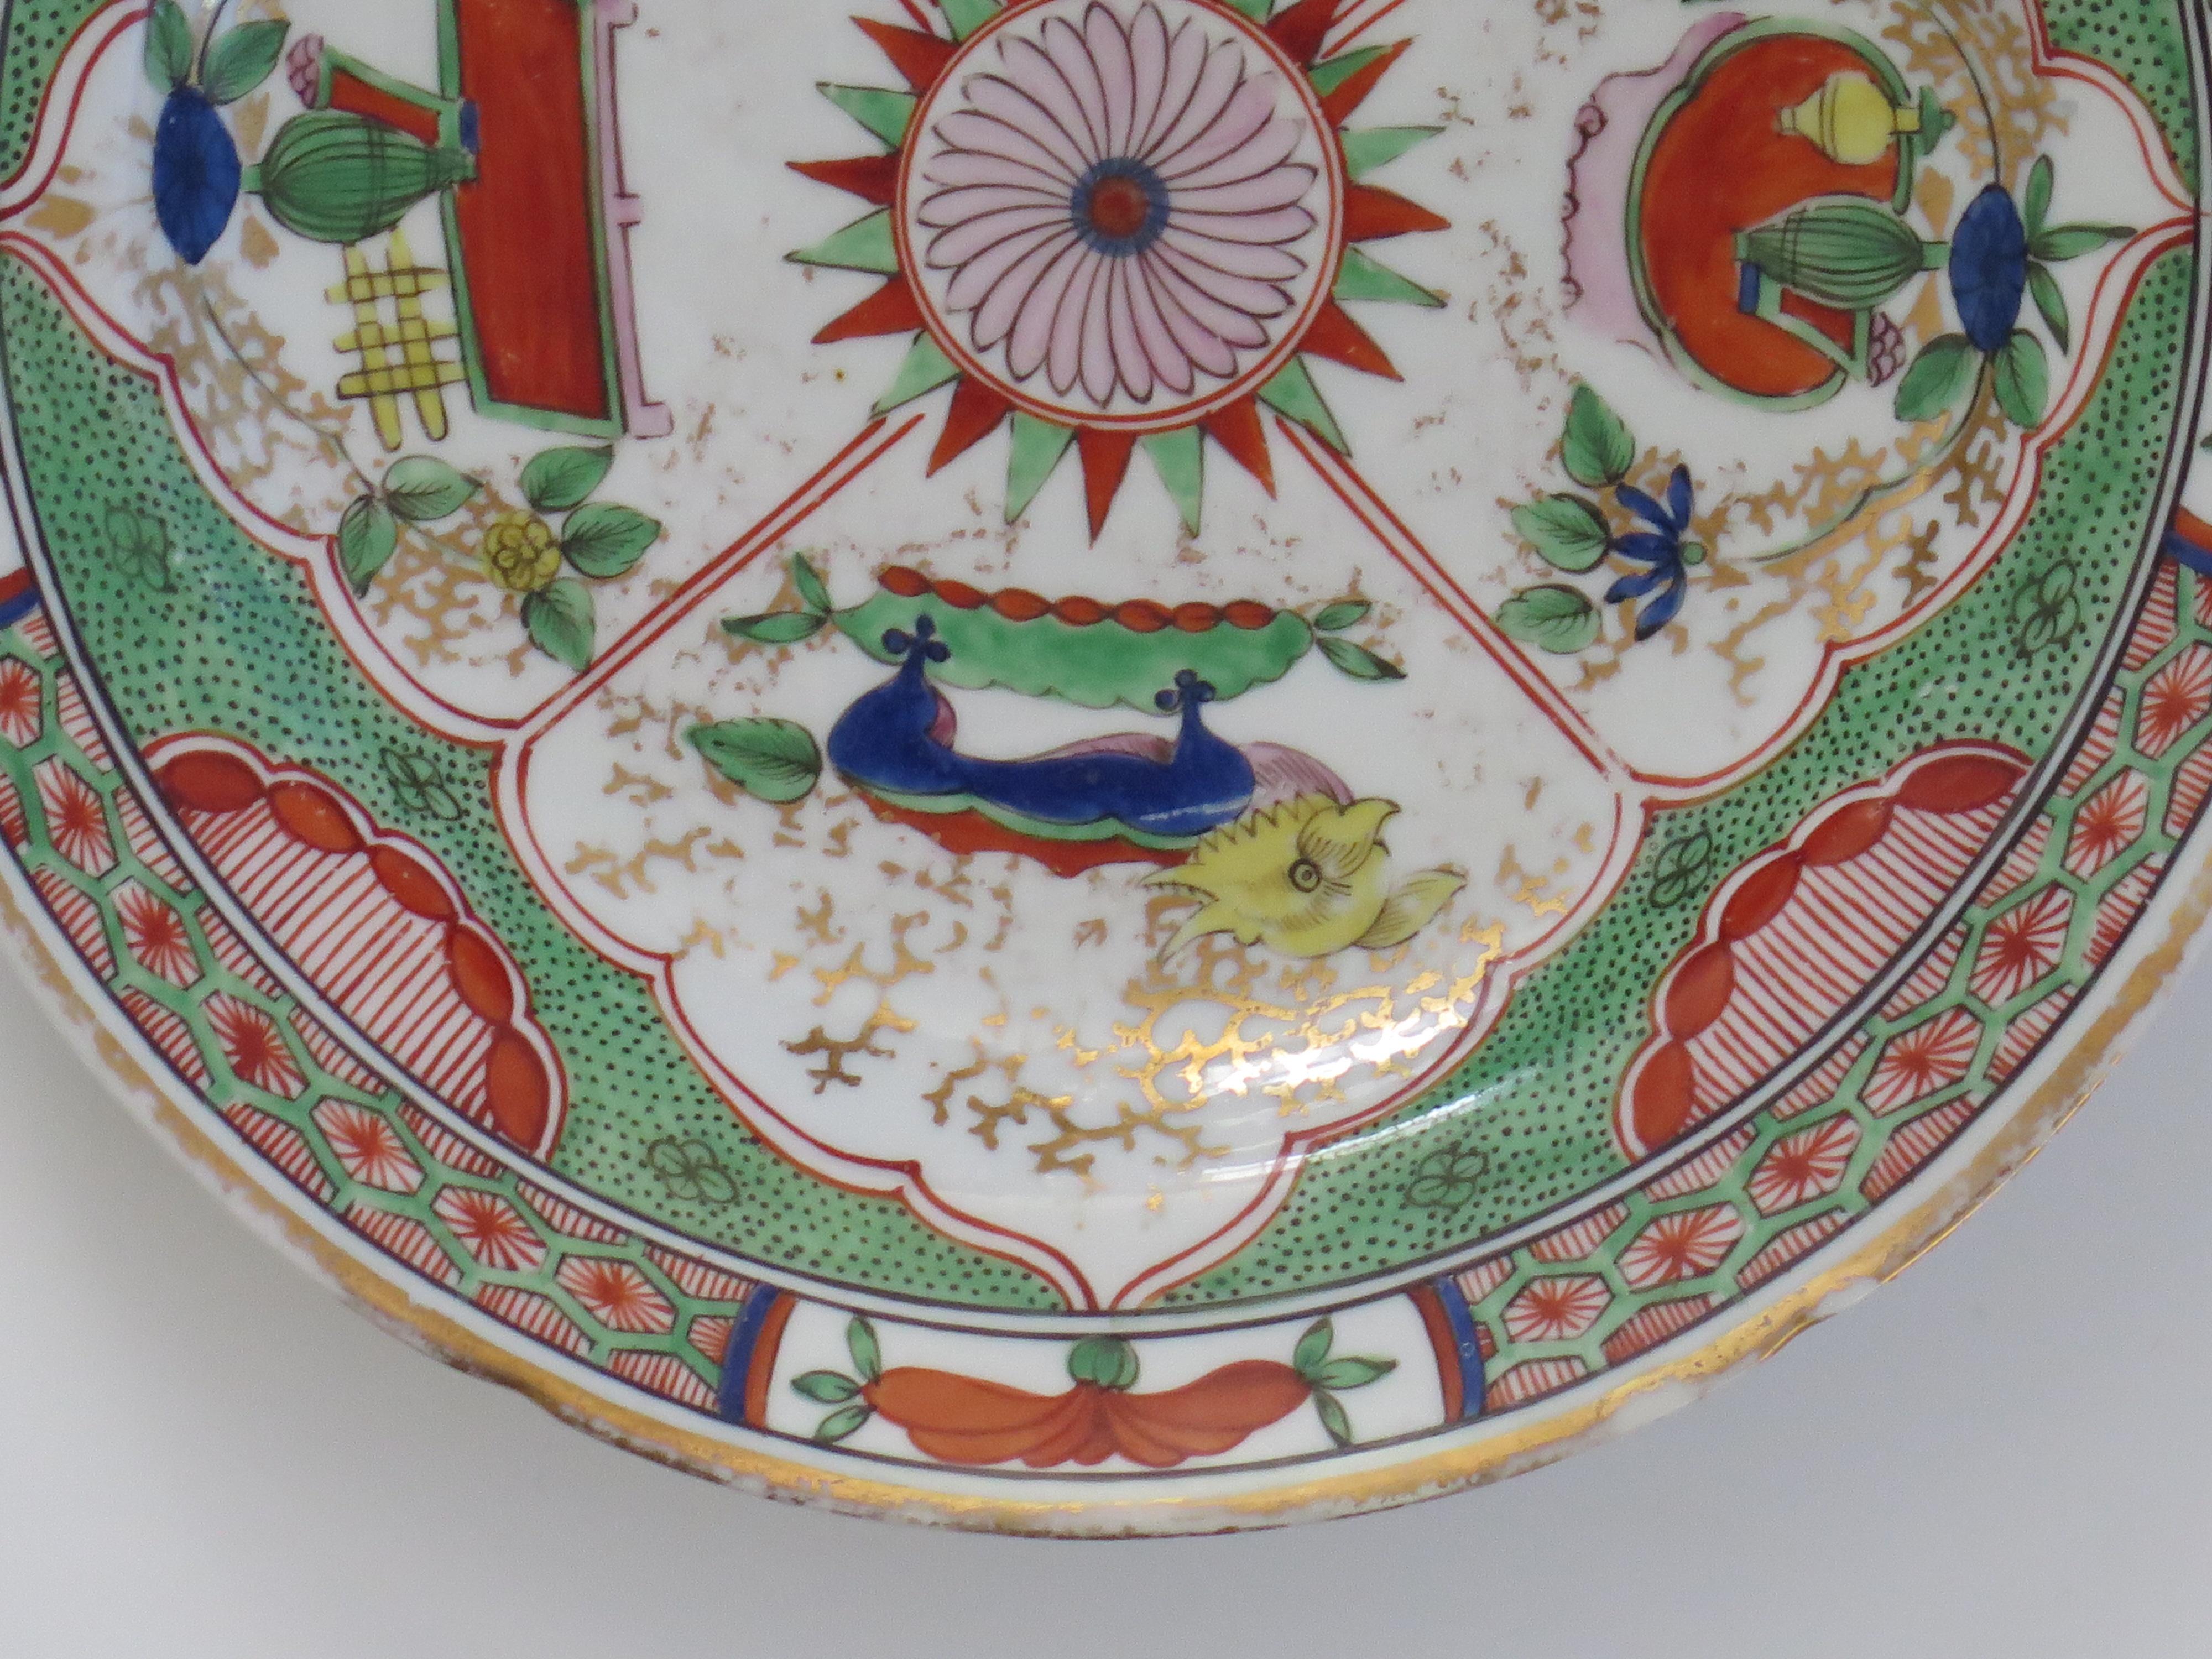 19th Century Chamberlains Worcester Plate Porcelain Dragon in Compartments Ptn. 75, Ca 1800 For Sale